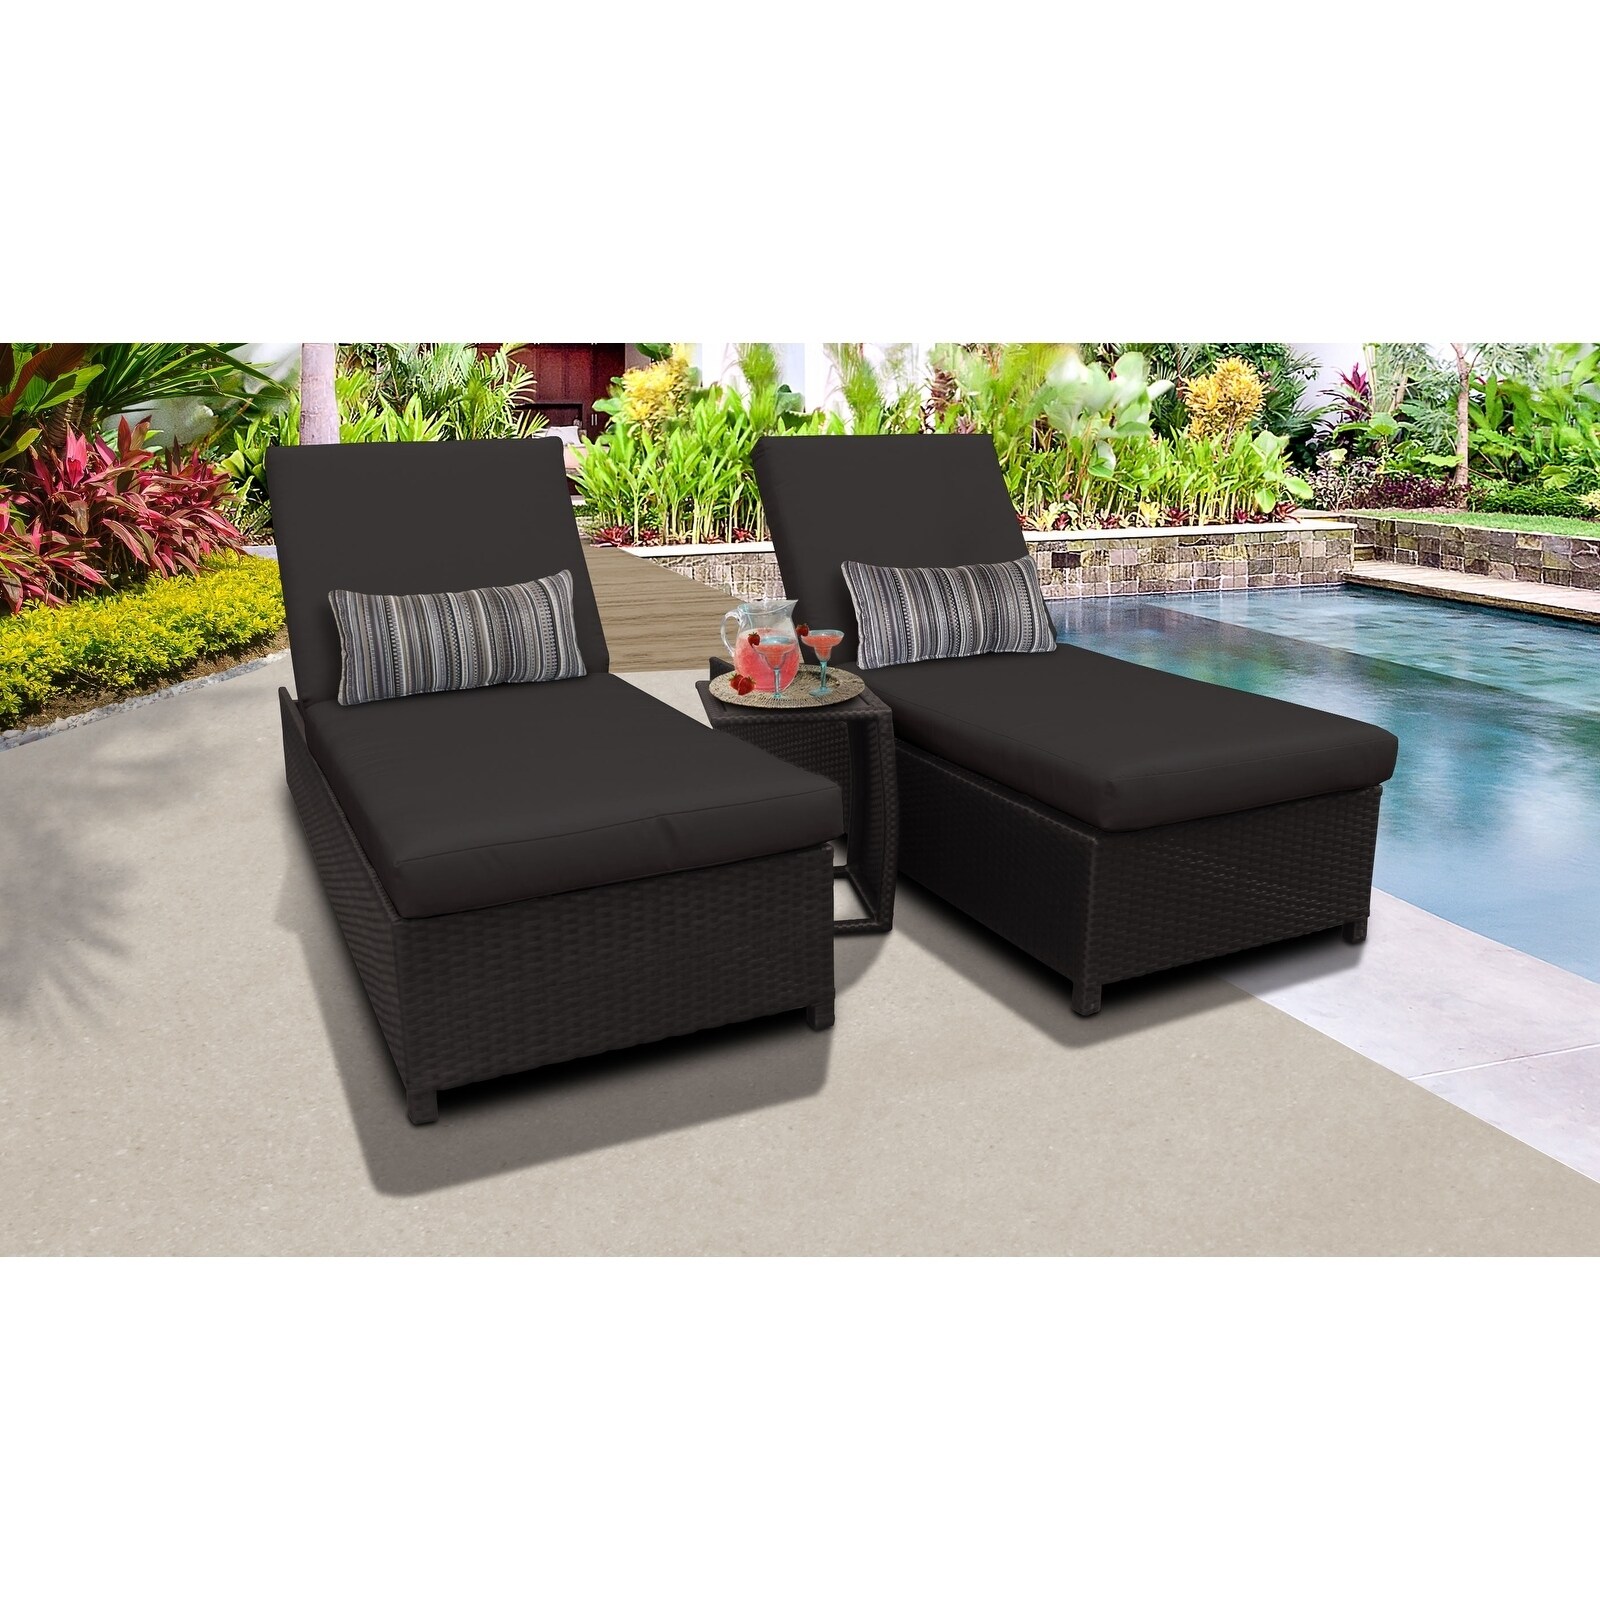 Belle Wheeled Chaise Set Of 2 Outdoor Wicker Patio Furniture And Side Table